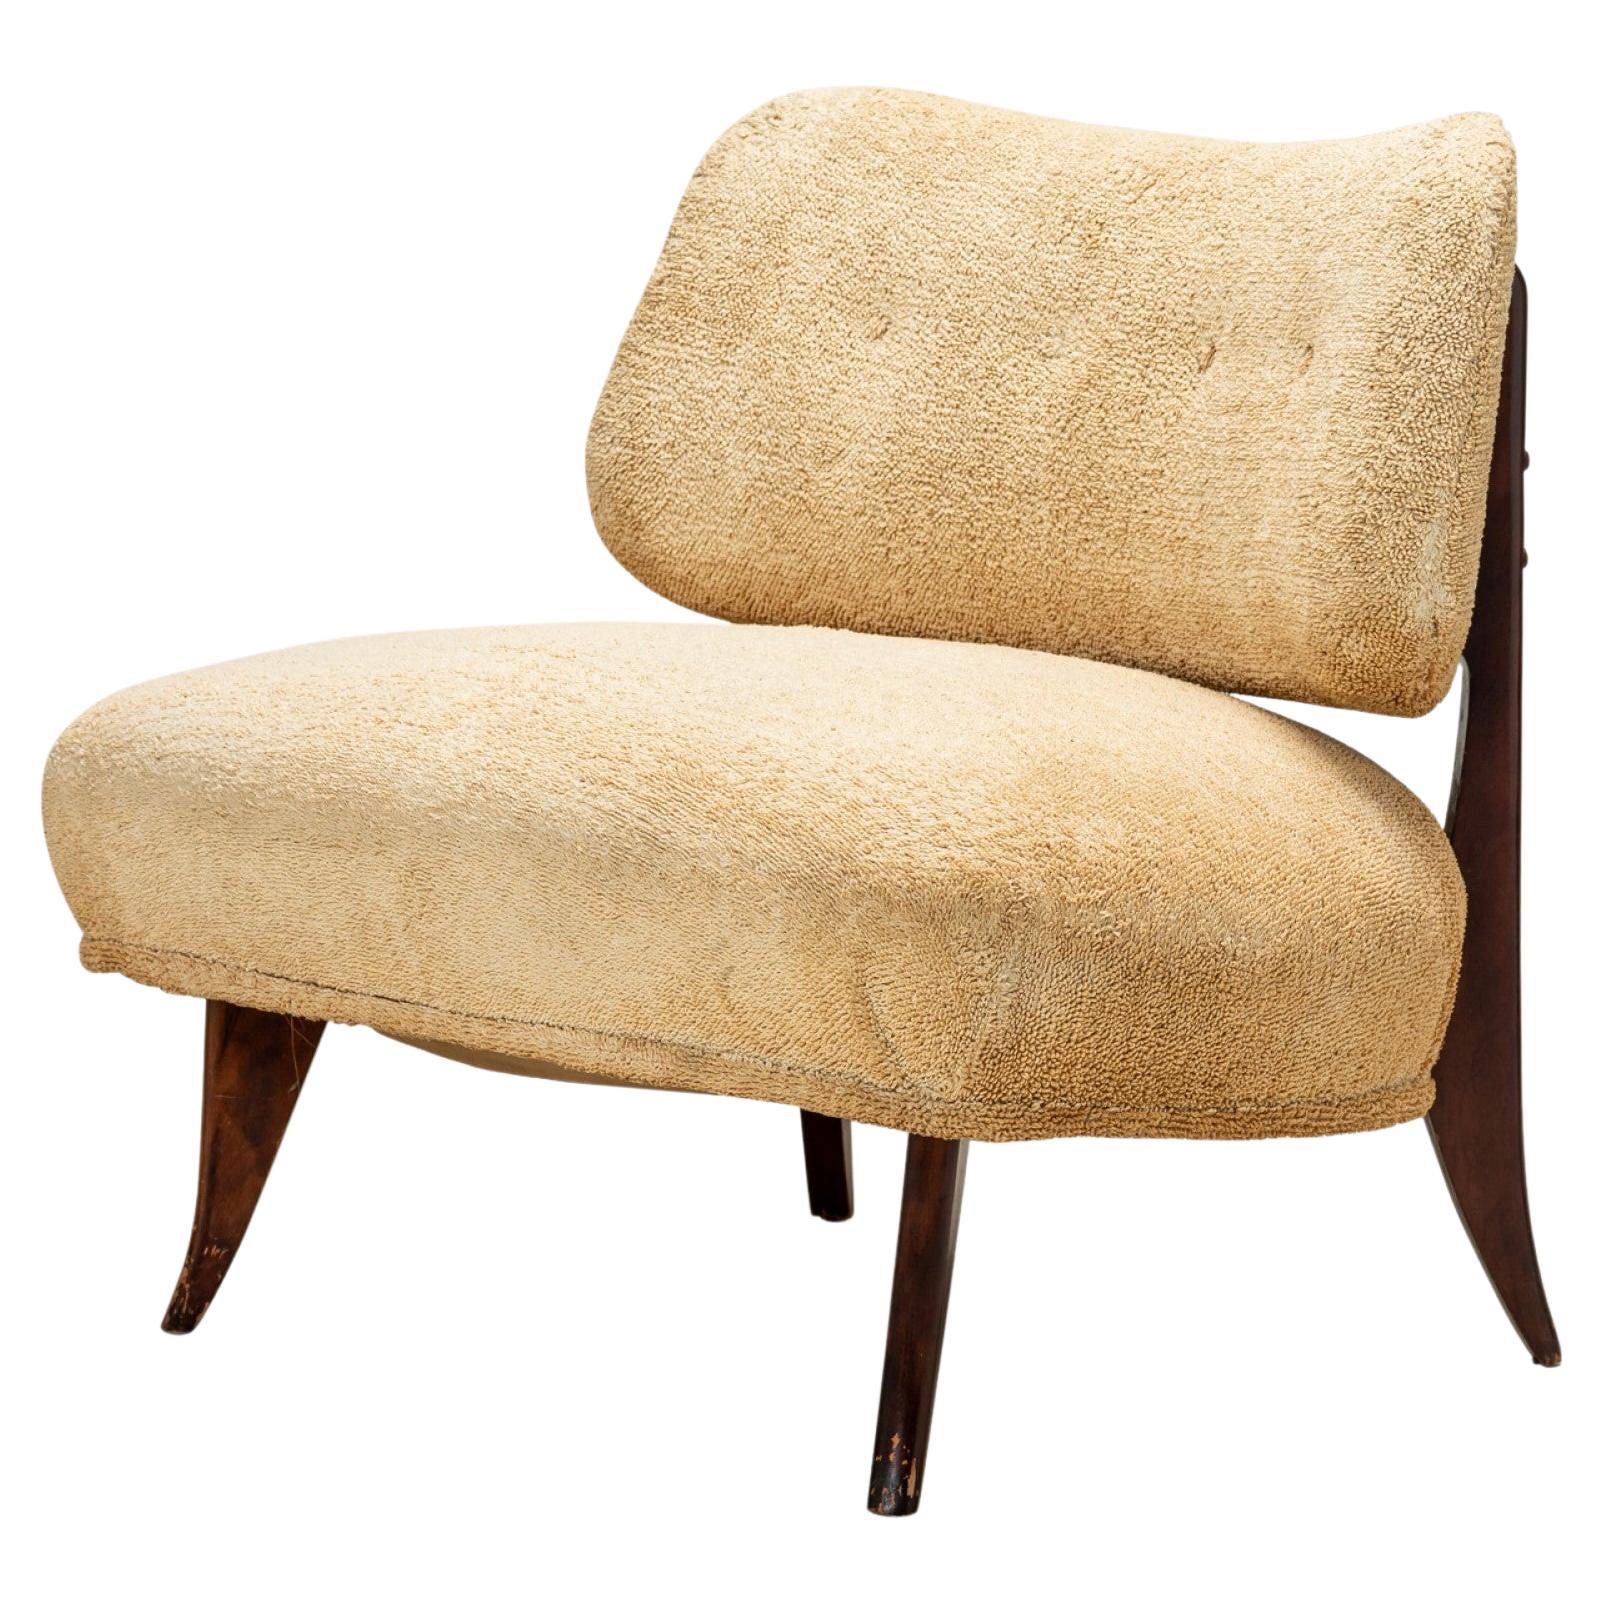 American Art Deco Low Beige Terrycloth Upholstered Slipper Chair For Sale